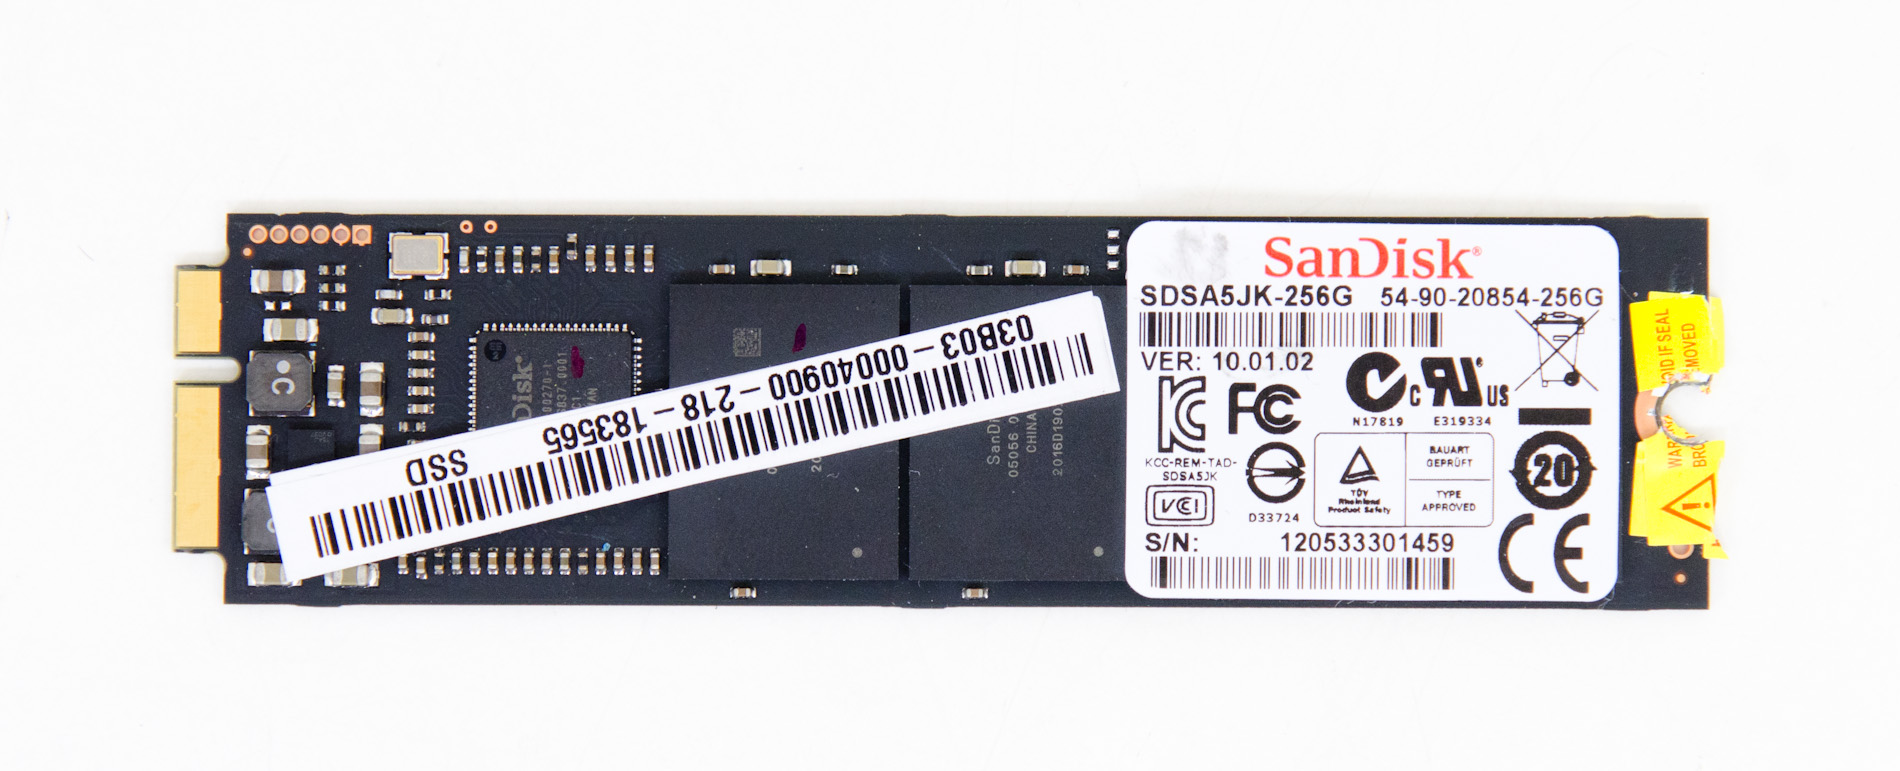 Witty Habubu Reach out ASUS' Zenbook SSD and Apple's MacBook Air SSD Are Not Compatible